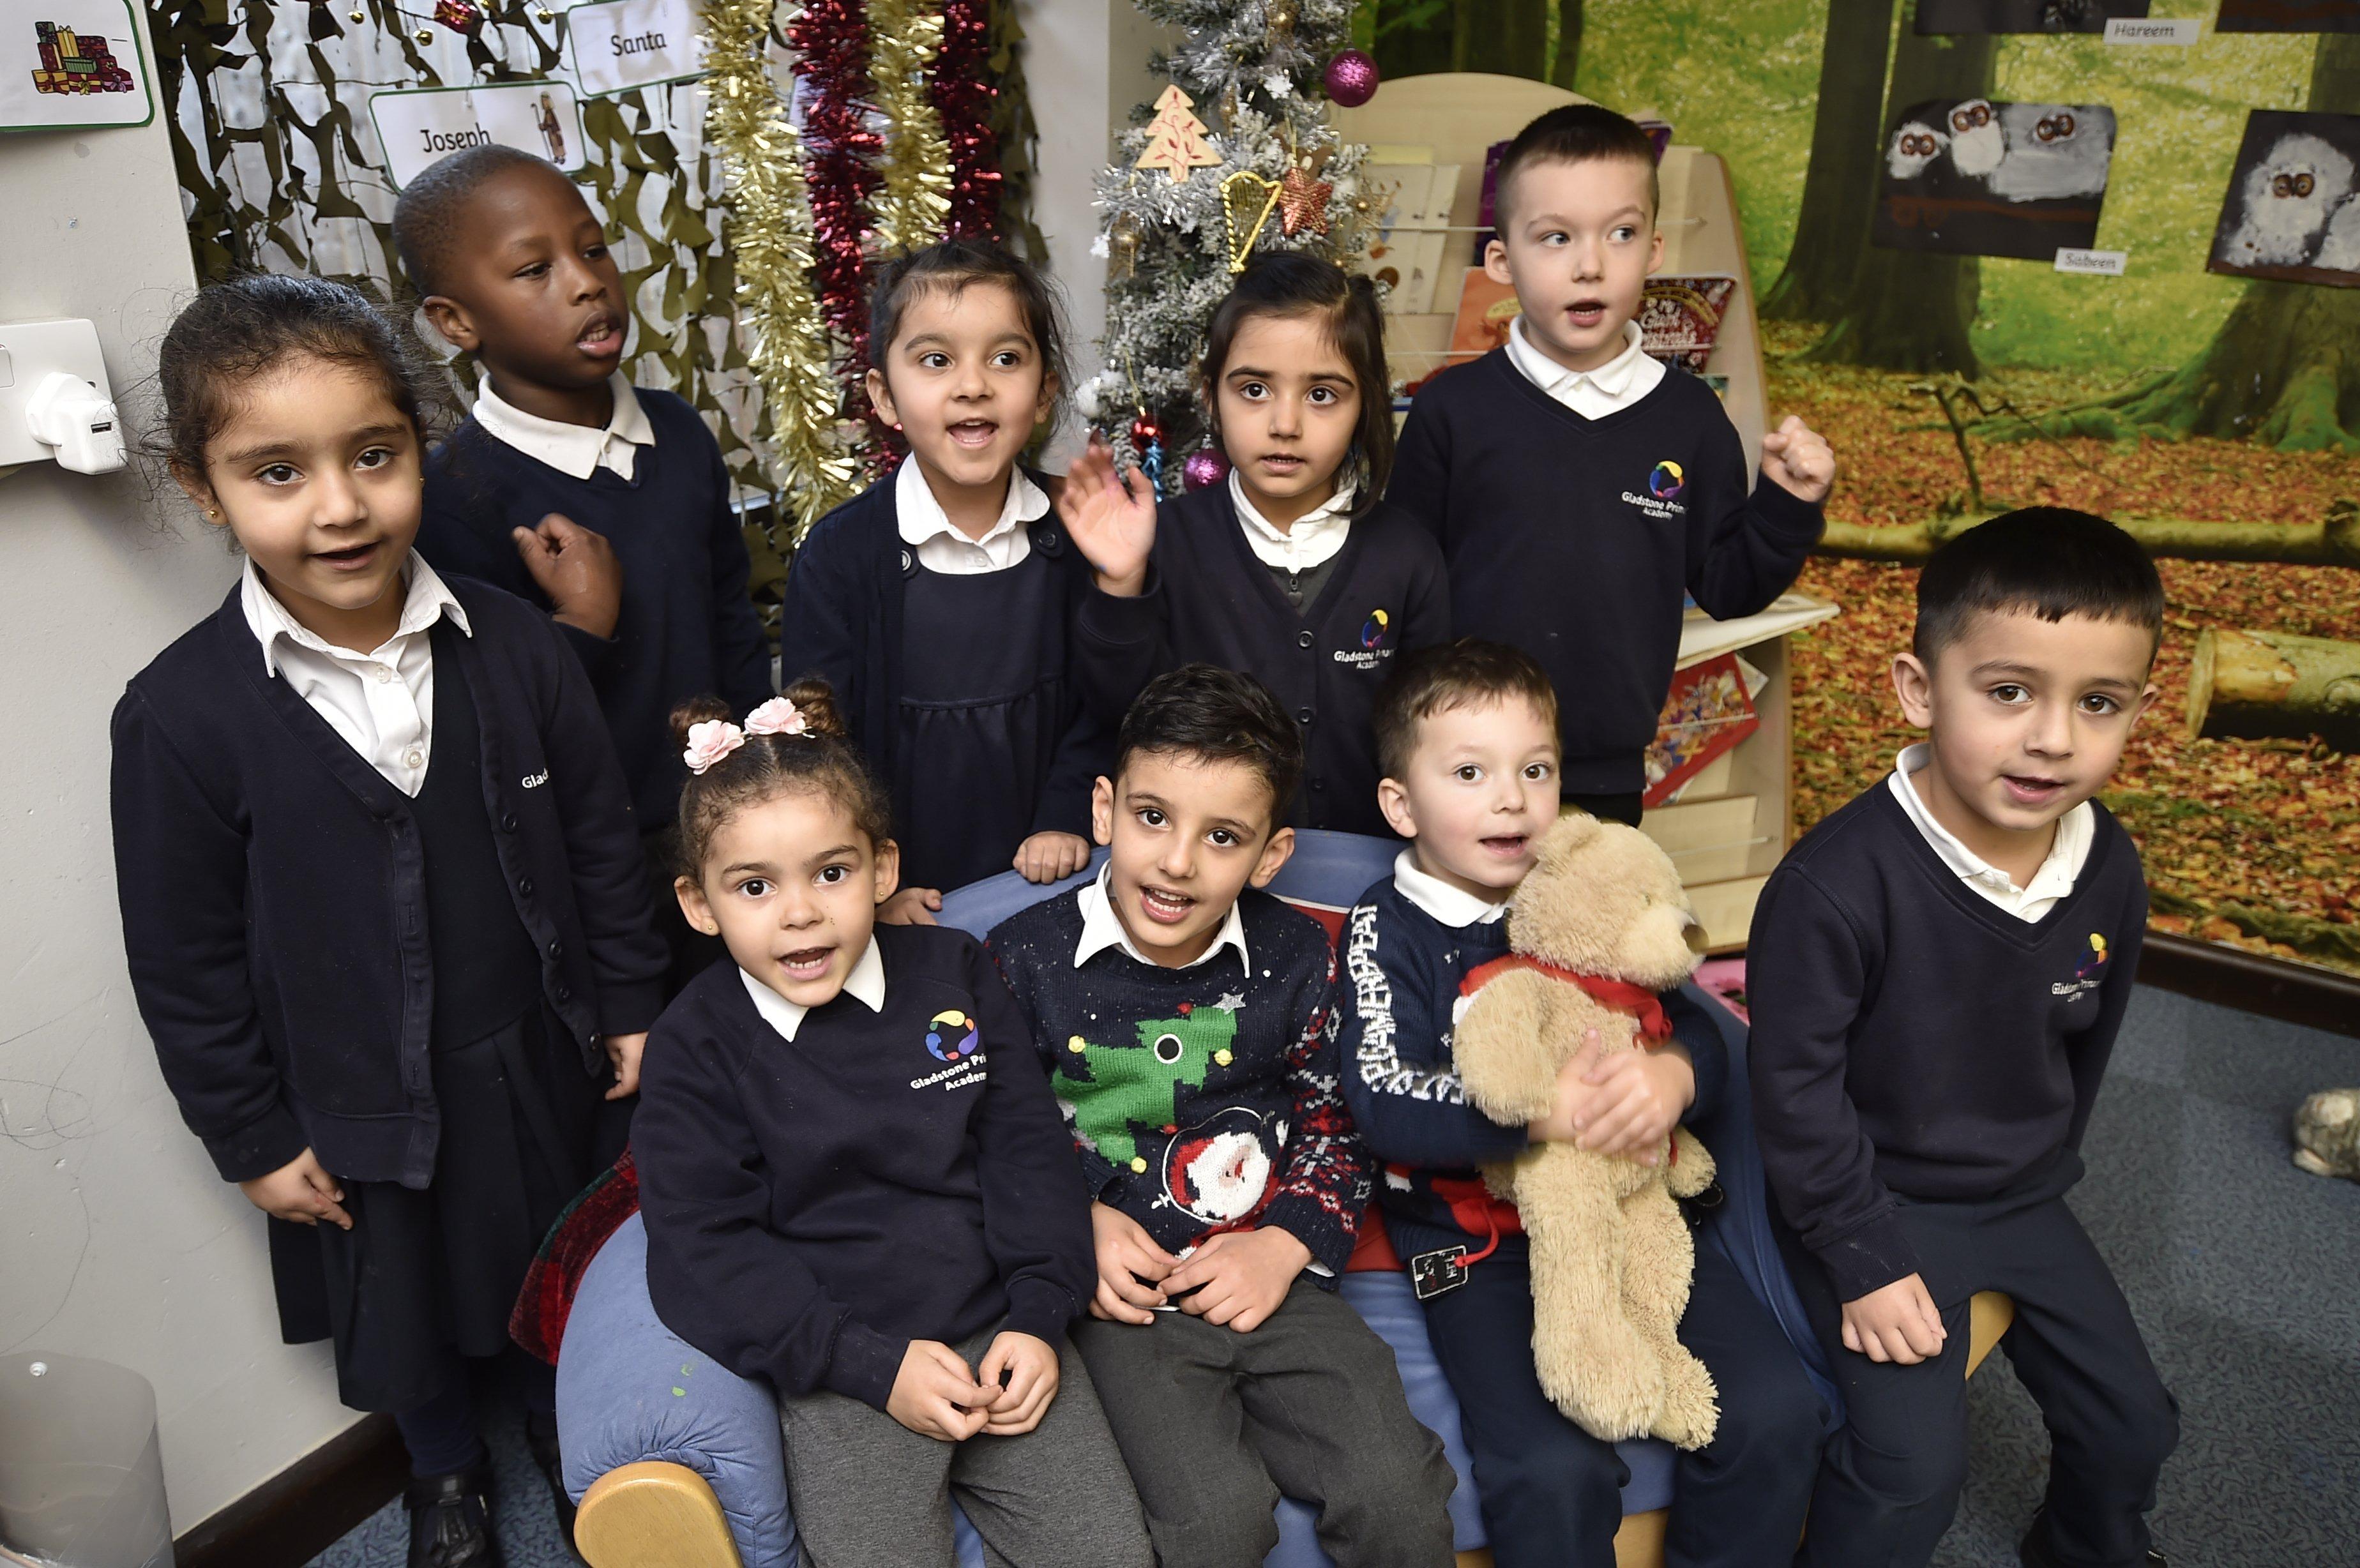 Reception pupils at Gladstone primary school who took part in their Christmas carol concert for parents. Nat19 EMN-191218-151047009